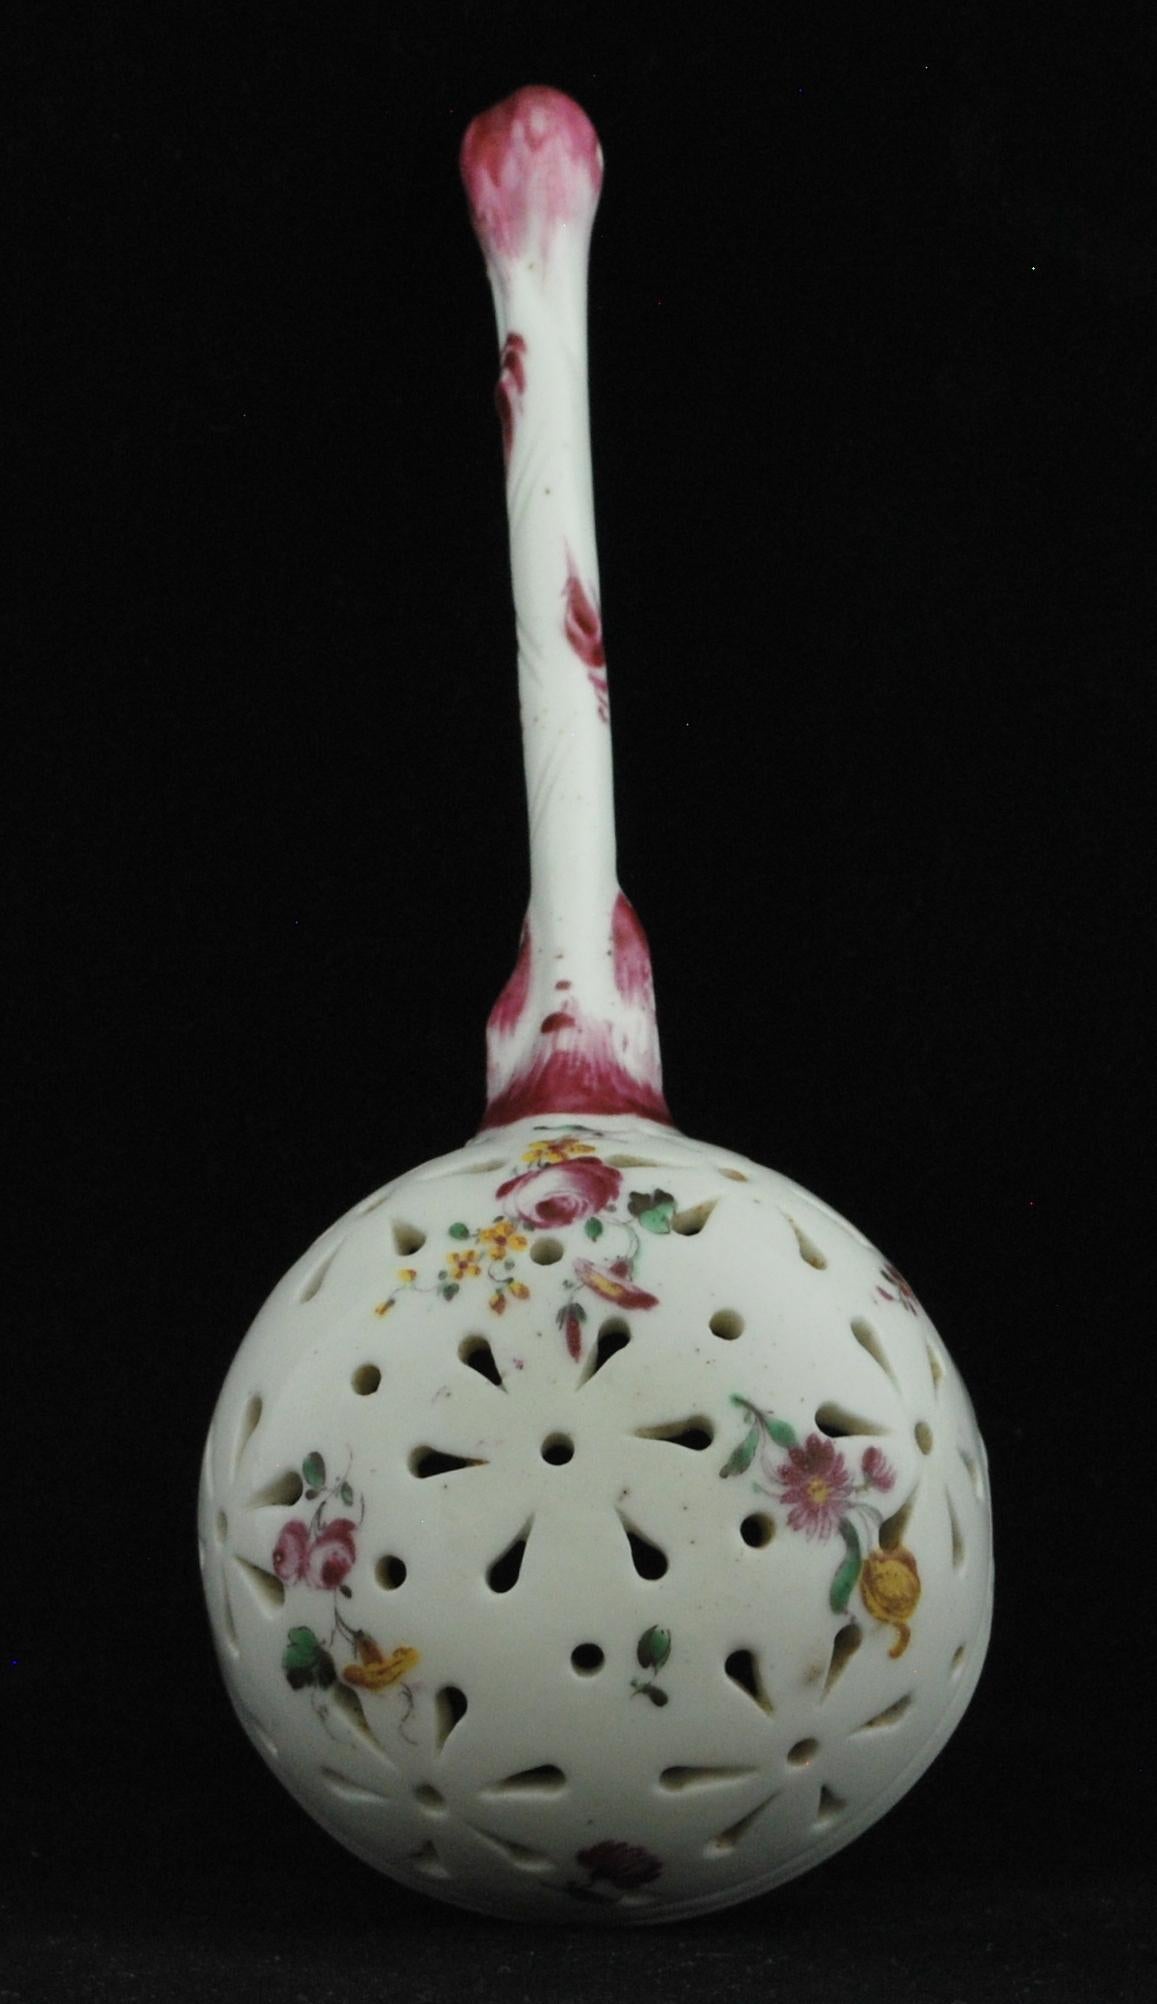 A pierced ladle, probably intended as a sifter as part of a dessert service. The flower painting is particularly fine.